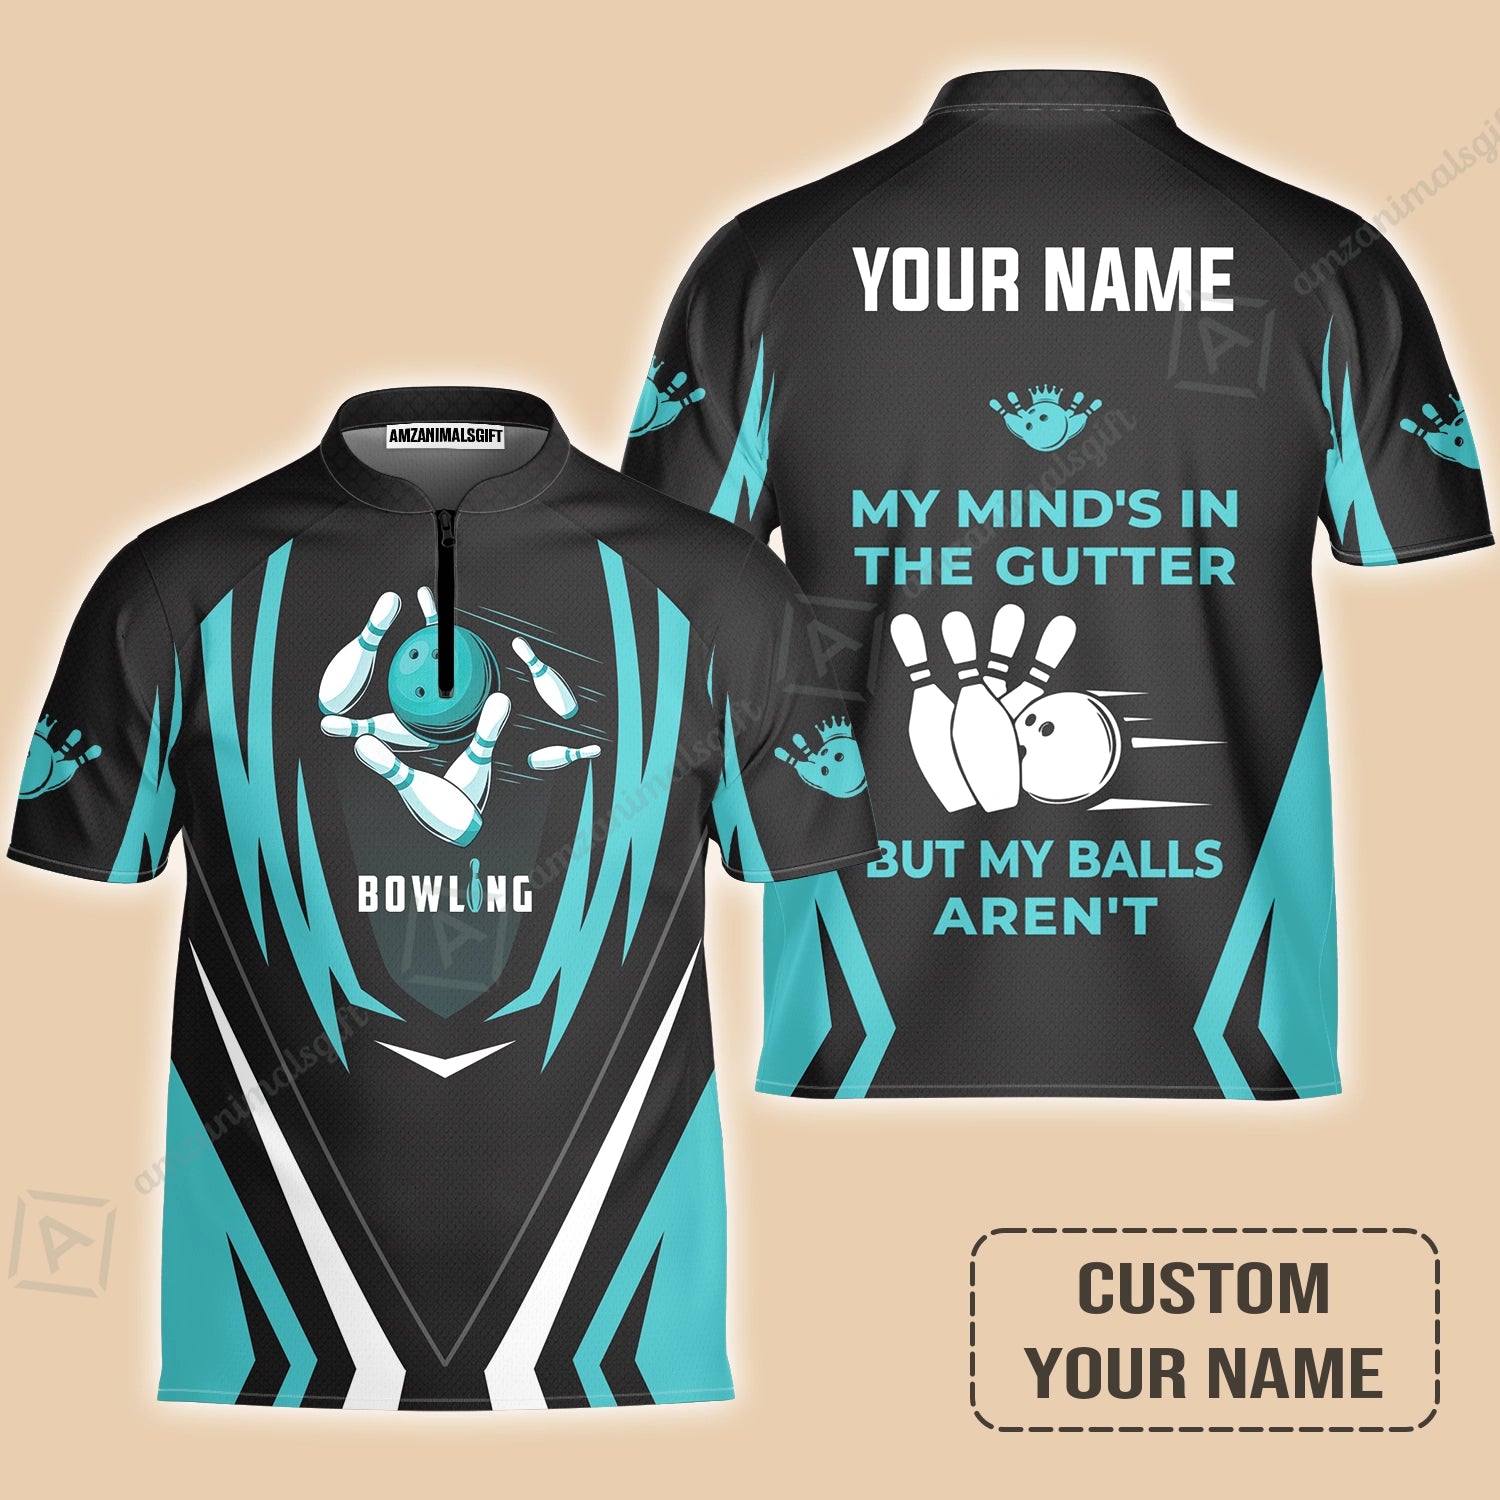 Personalized Bowling Jersey, Light Blue Bowling Customized Shirt My Mind's In The Gutter For Friend, Family, Bowling Lovers